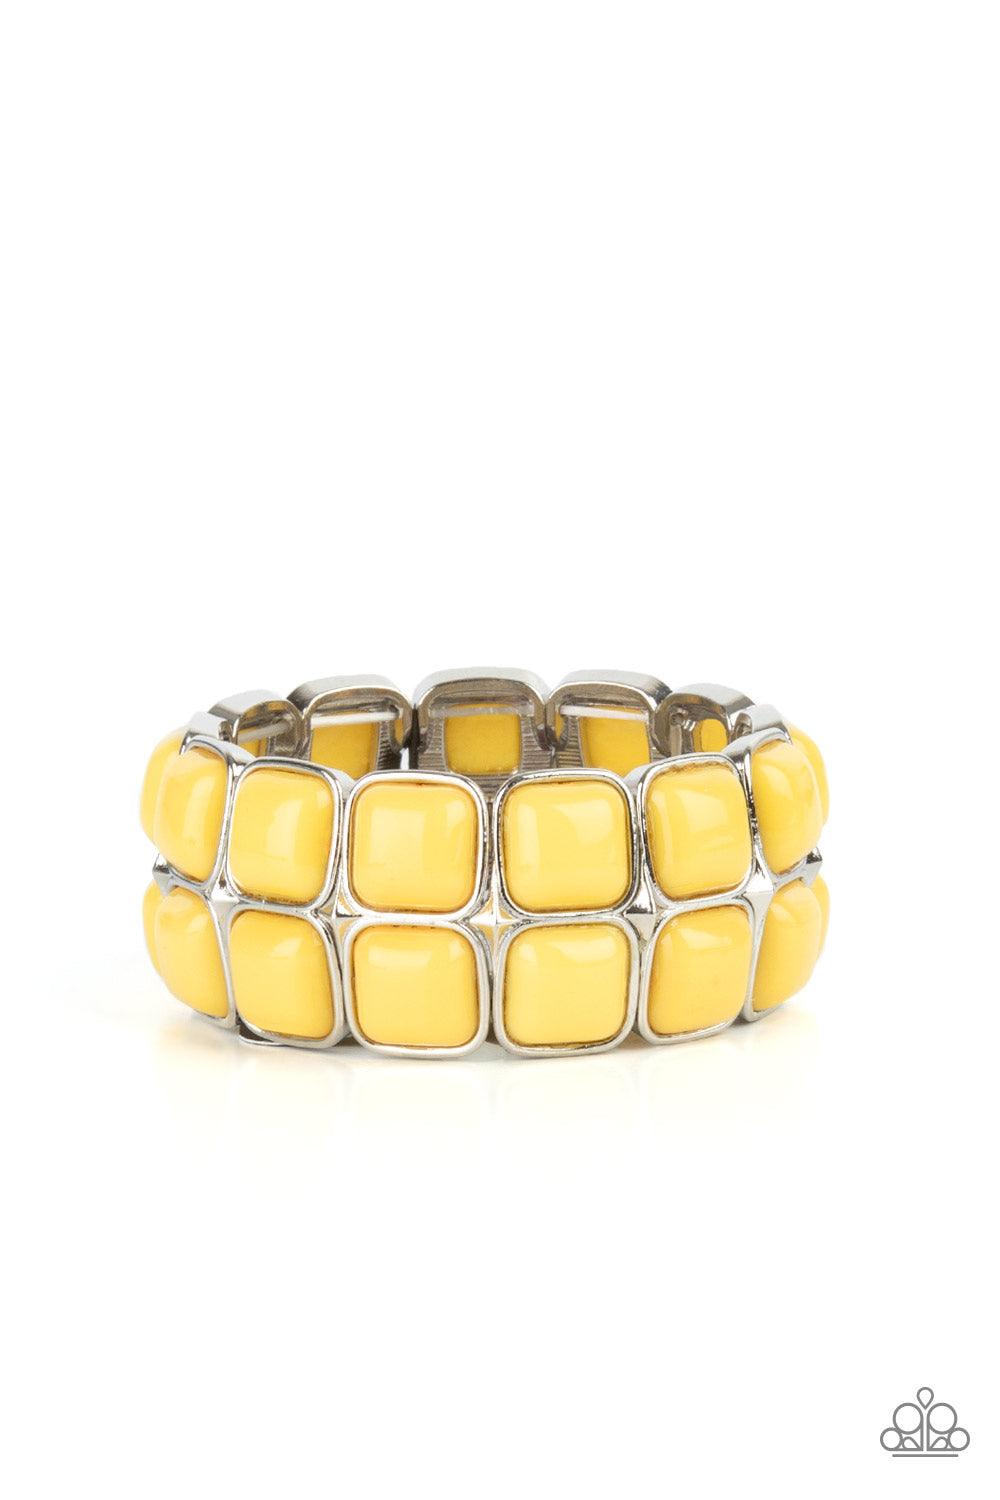 Paparazzi Accessories Double The DIVA-ttitude - Yellow Stacks of cubed Illuminating beaded silver frames are threaded along a stretchy band around the wrist, creating a bubbly pop of color. Sold as one individual bracelet. Jewelry